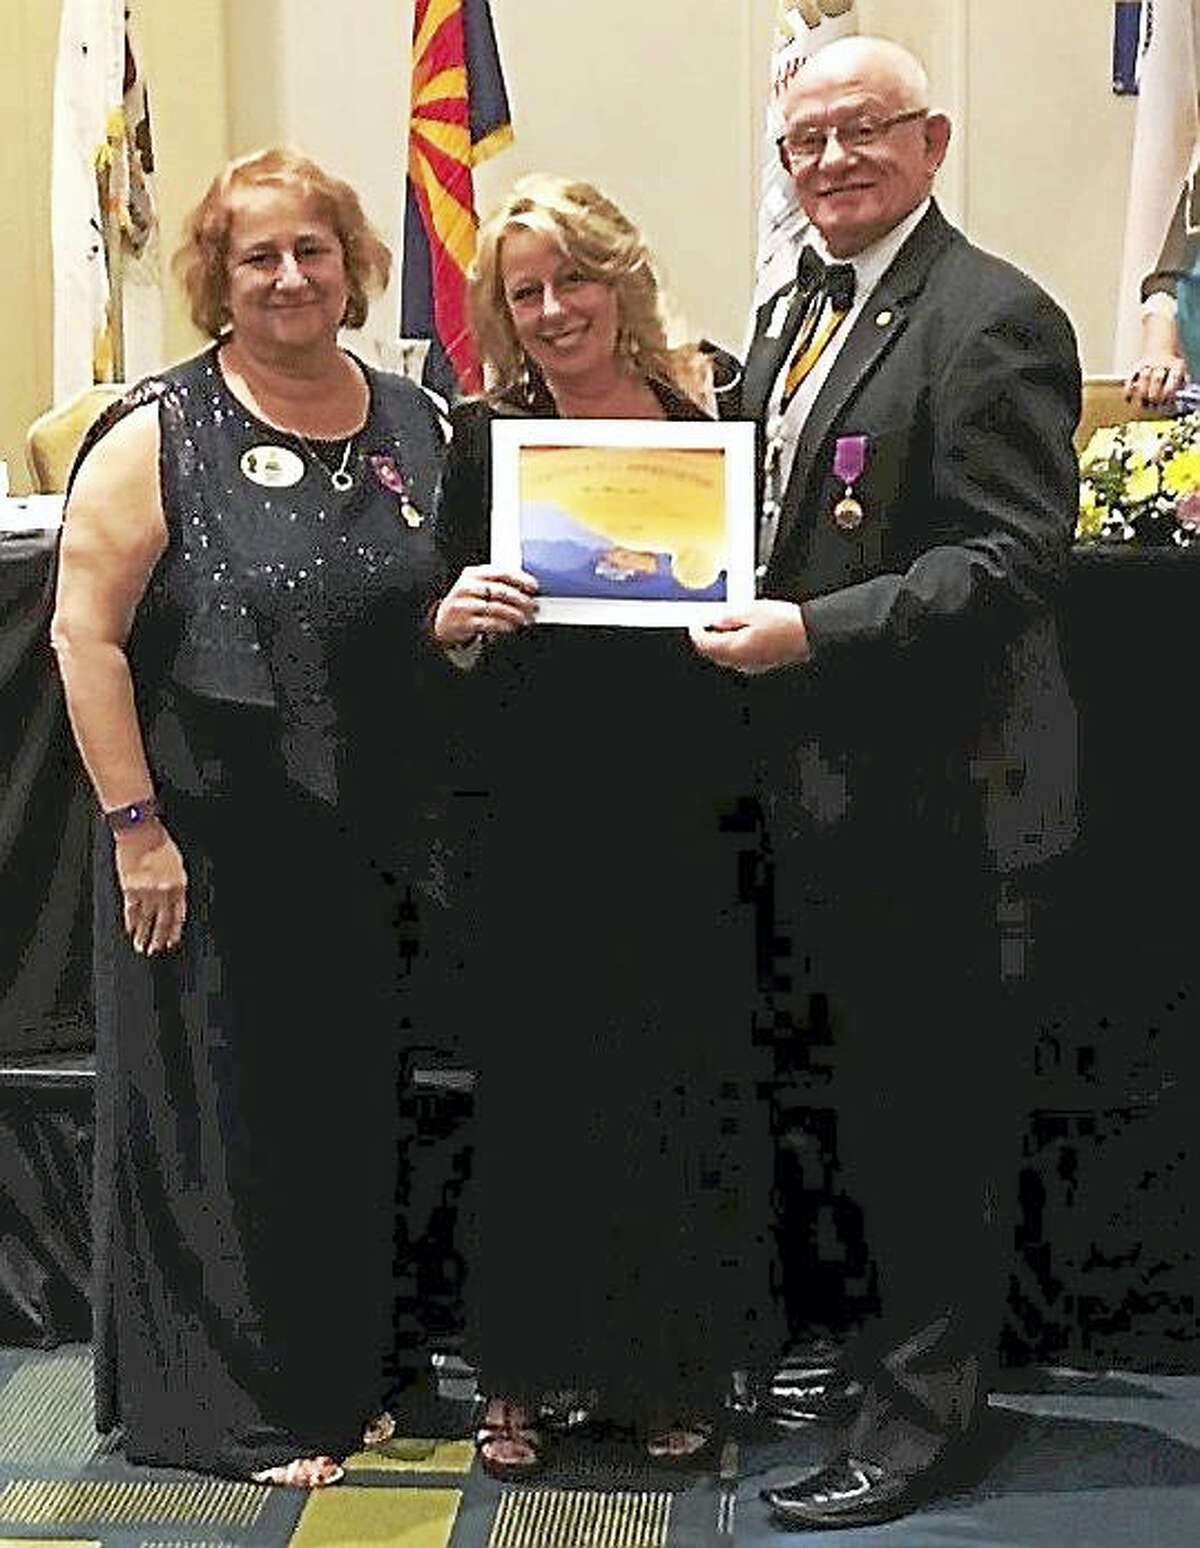 From left, Lions Club District Governor Colette Anderson, Zone Chairwoman Melissa A. Smith and International Director N. Alan Lundgre.